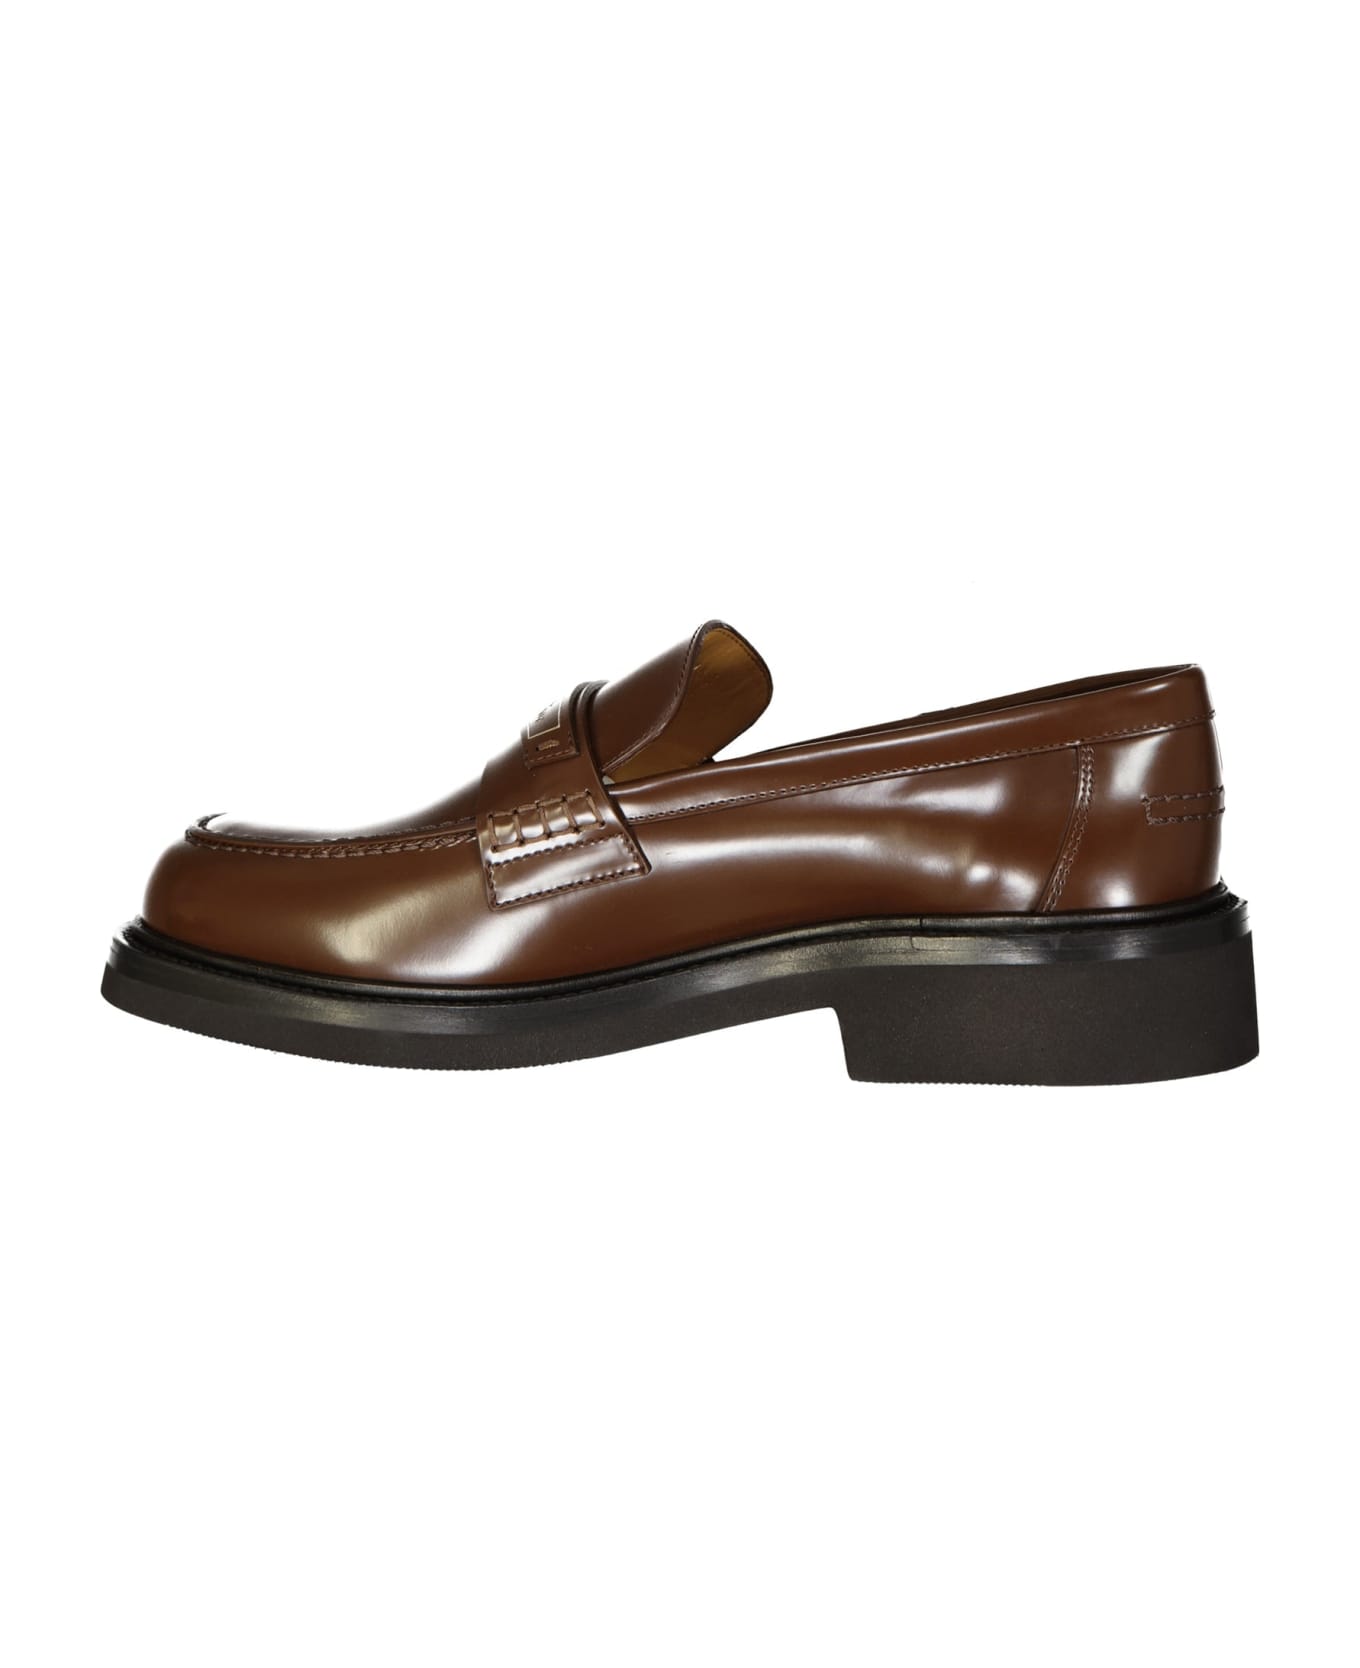 Dior Leather Loafers - Brown フラットシューズ